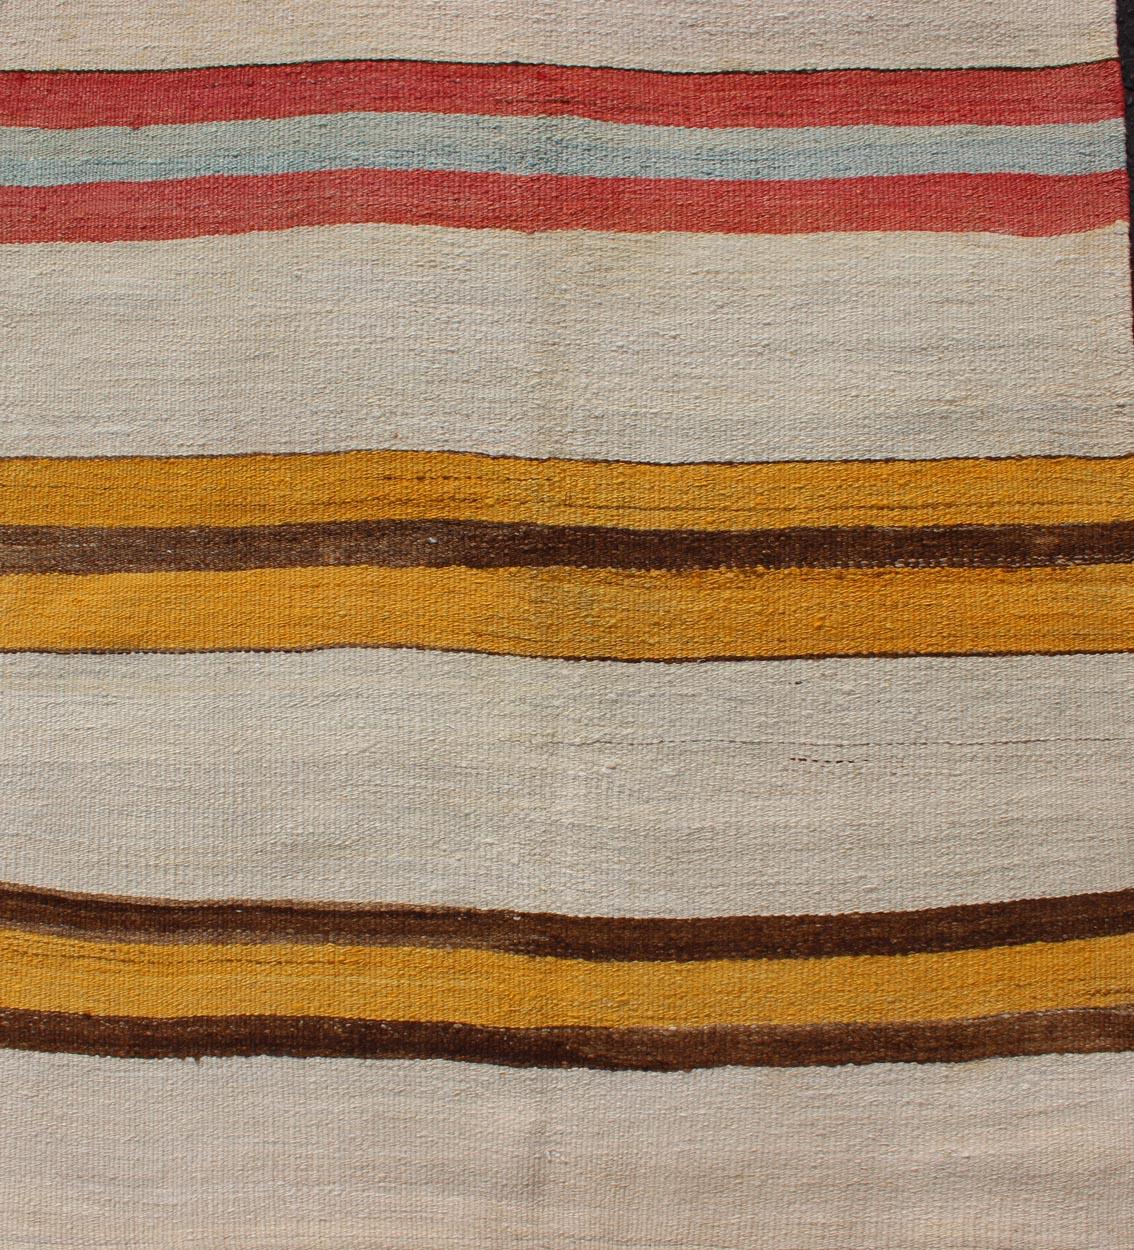 Wool  Vintage Colorful Kilim Runner With Stripe Design in Yellow, Ivory, Red & Brown  For Sale